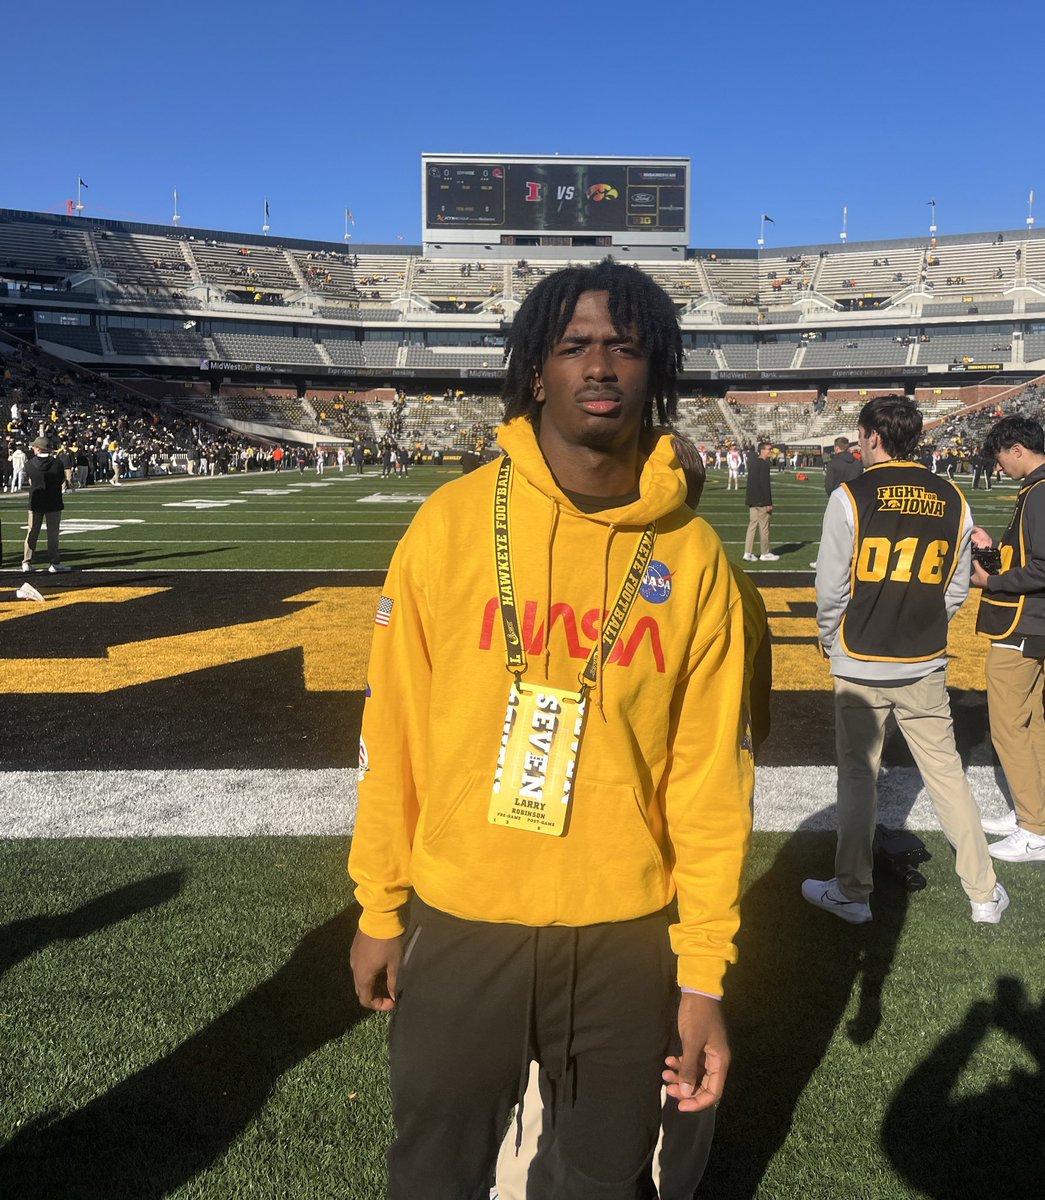 Great Visit to University of Iowa @HawkeyeFootball. I’m thankful. Got to speak with coaches @Abdul_Hodge and met WR coach @CopelandKelton. Great facilities and people. @jmac___19 @KirkwoodFB @JPRockMO